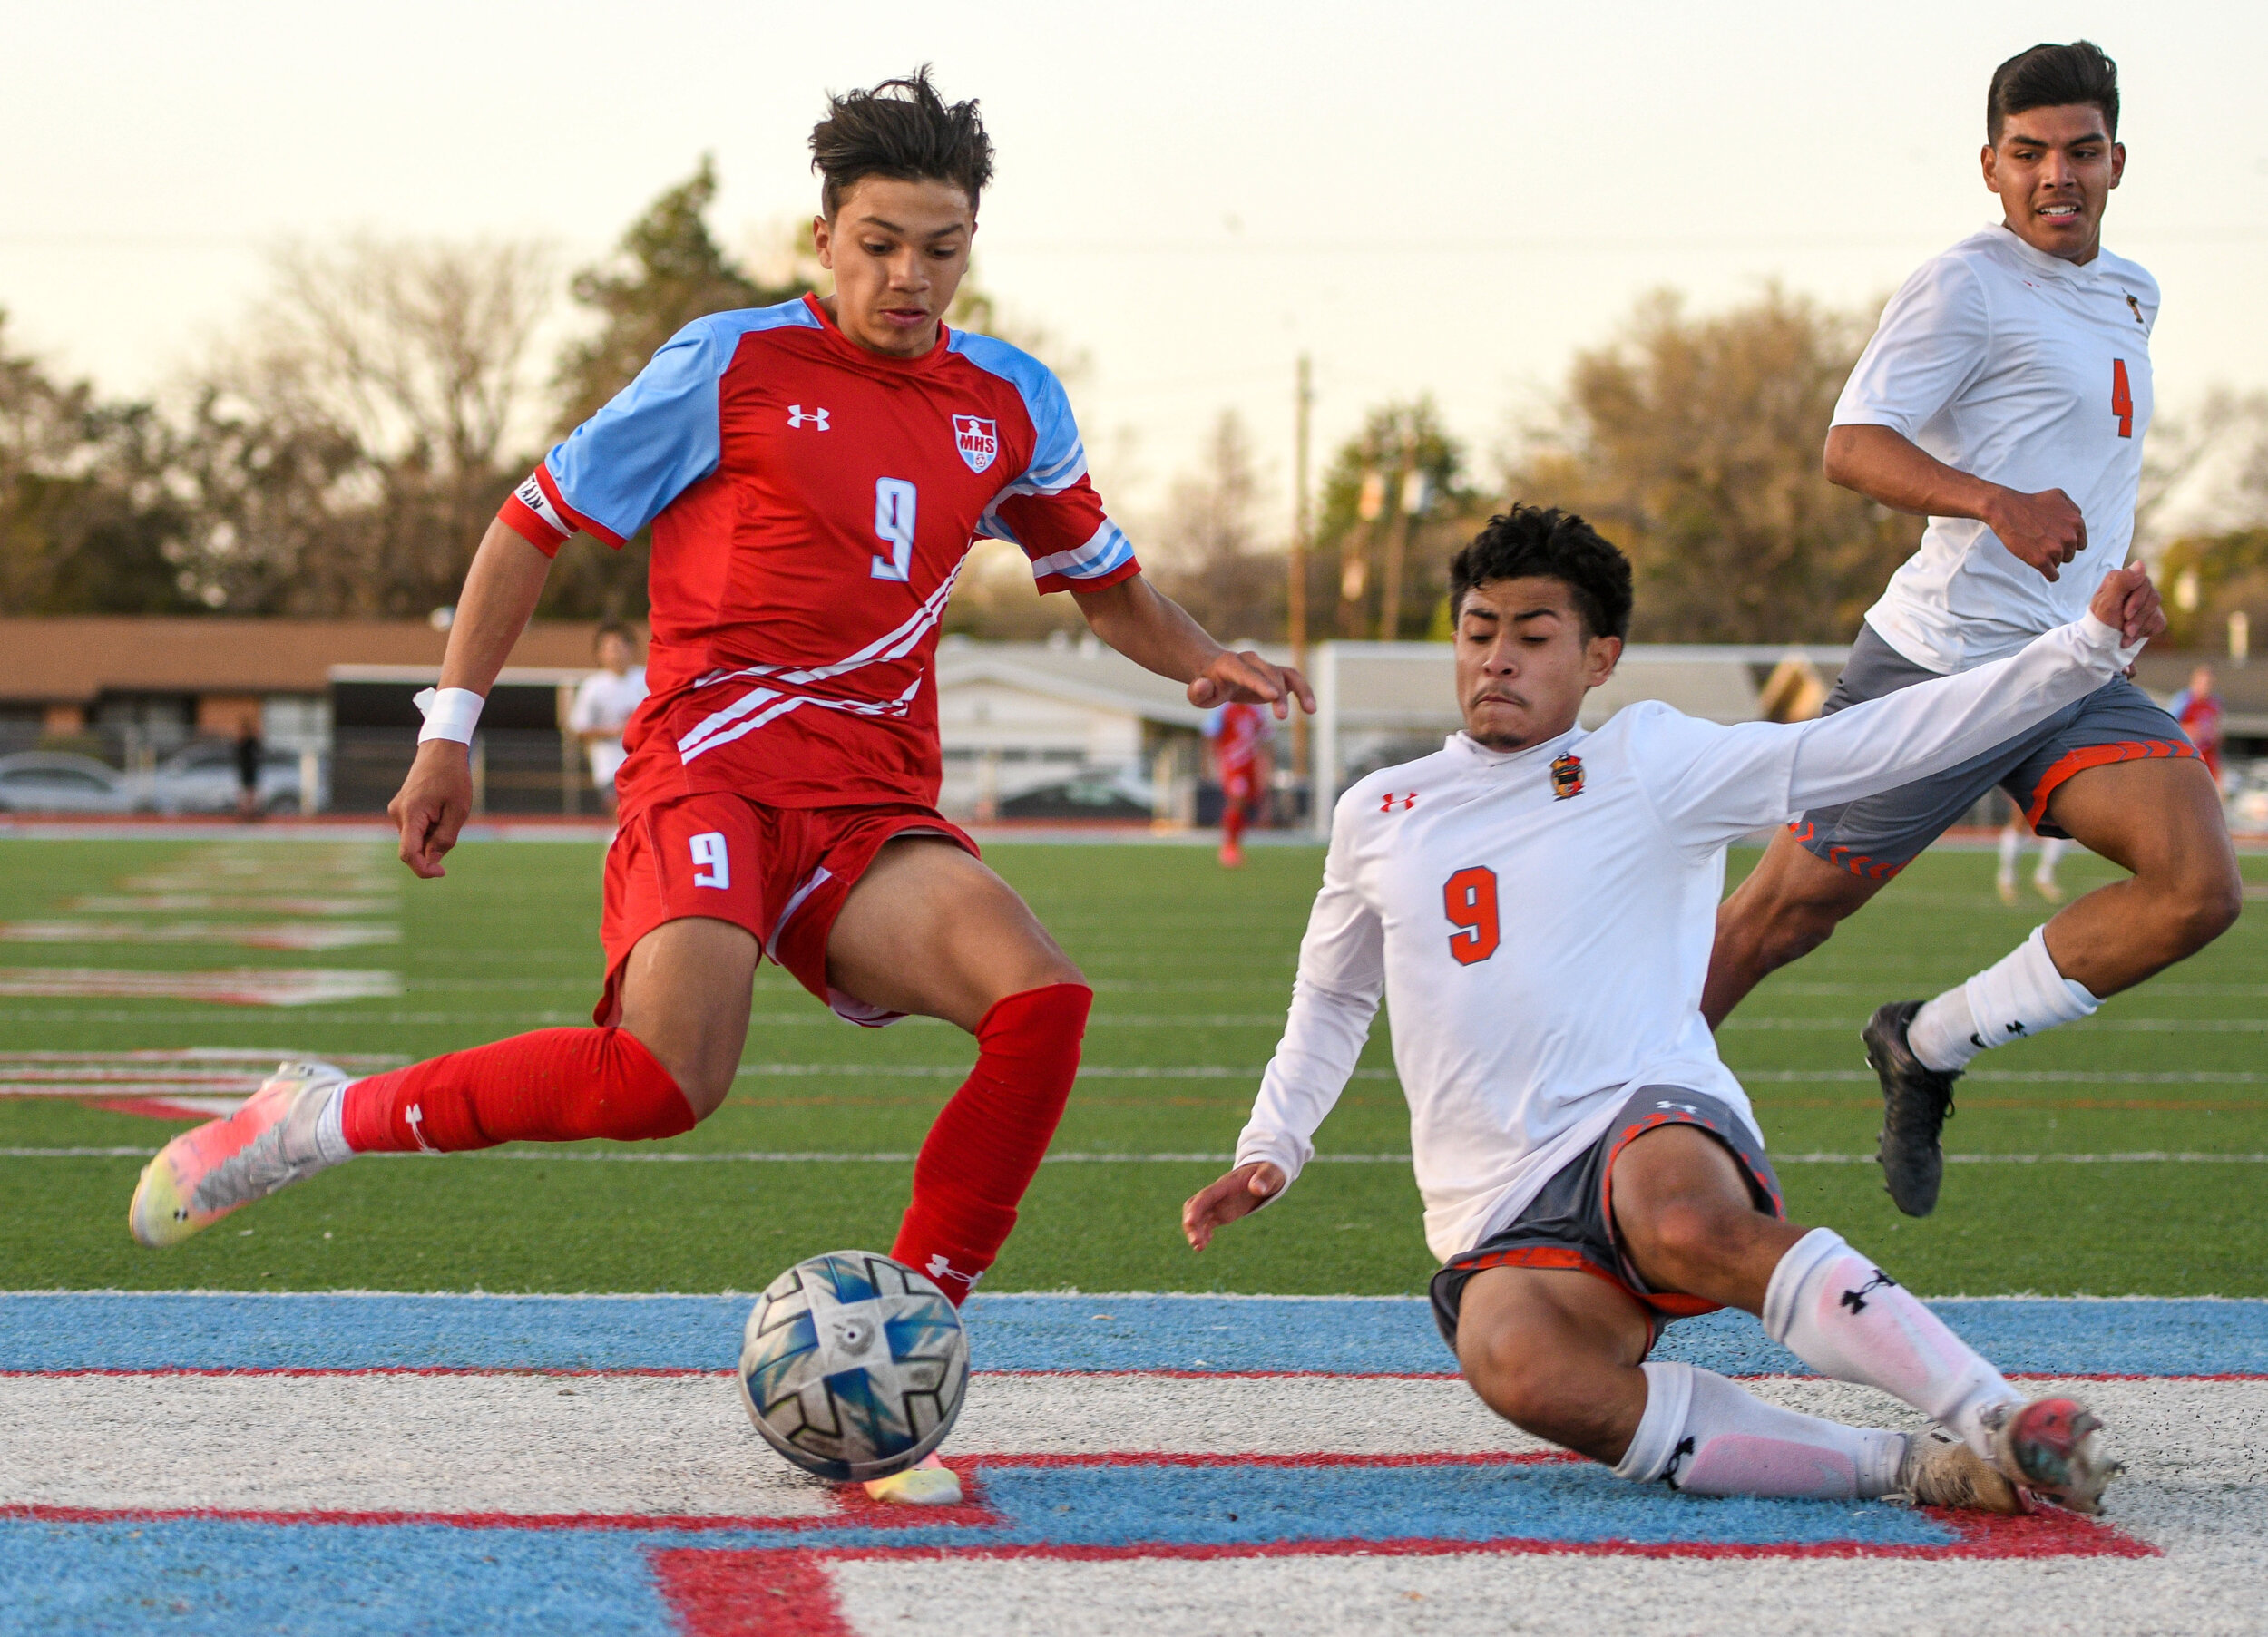  Monterey’s Edgar Gonzalez gets slide tackled by a Canyon defender during the soccer match against Canyon on Friday, March 26, 2021, at Monterey High School in Lubbock, Texas.  